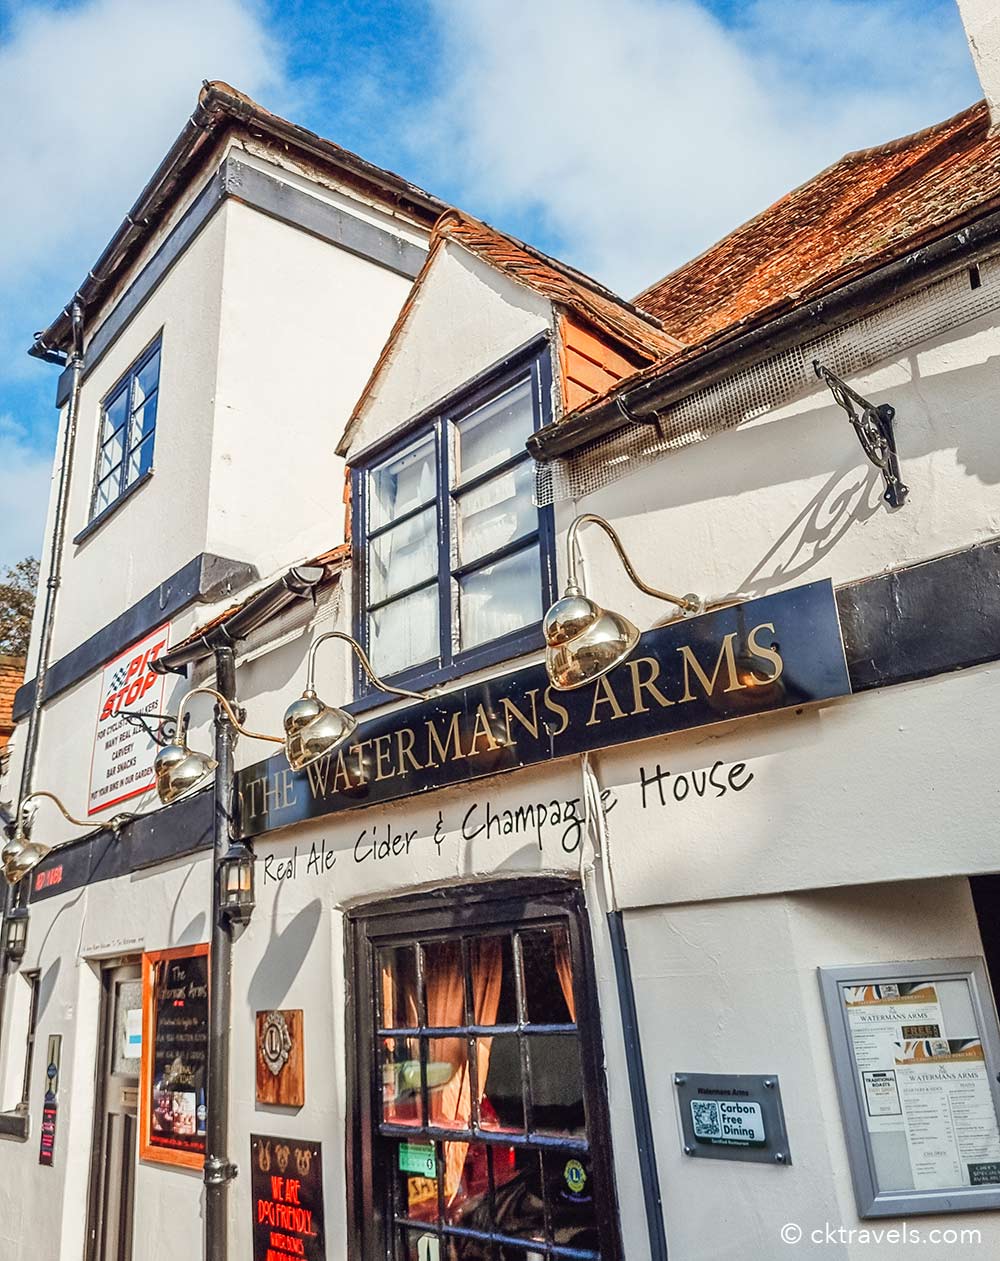 The Watermans Arms, Eton and Windsor. Copyright cktravels.com